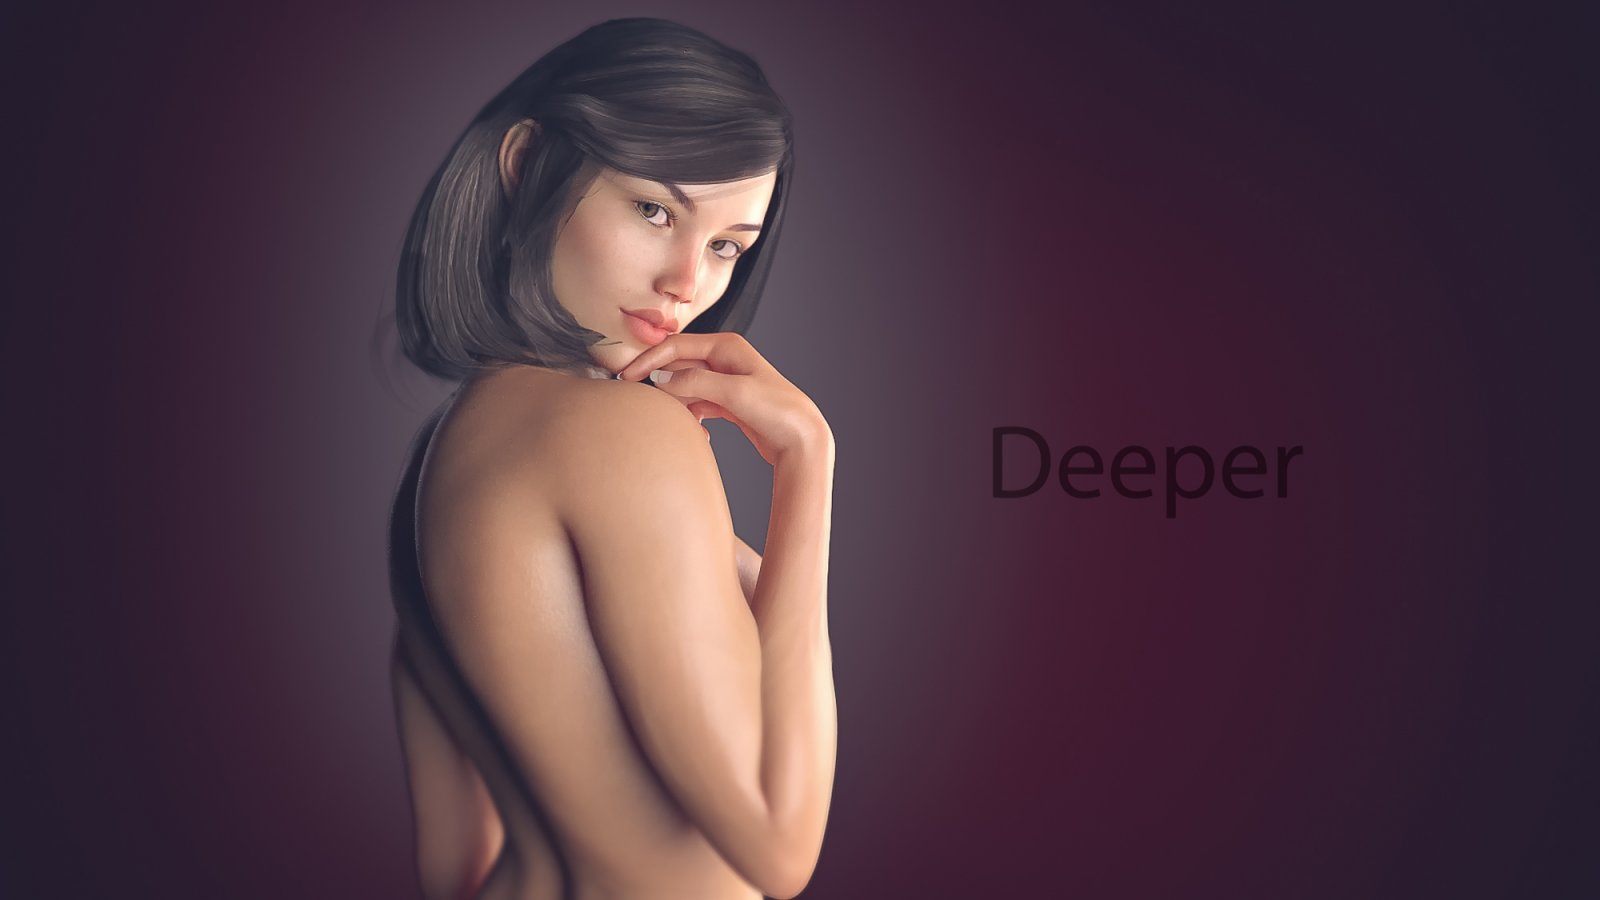 thundorn games deeper version posted zaola category adult games